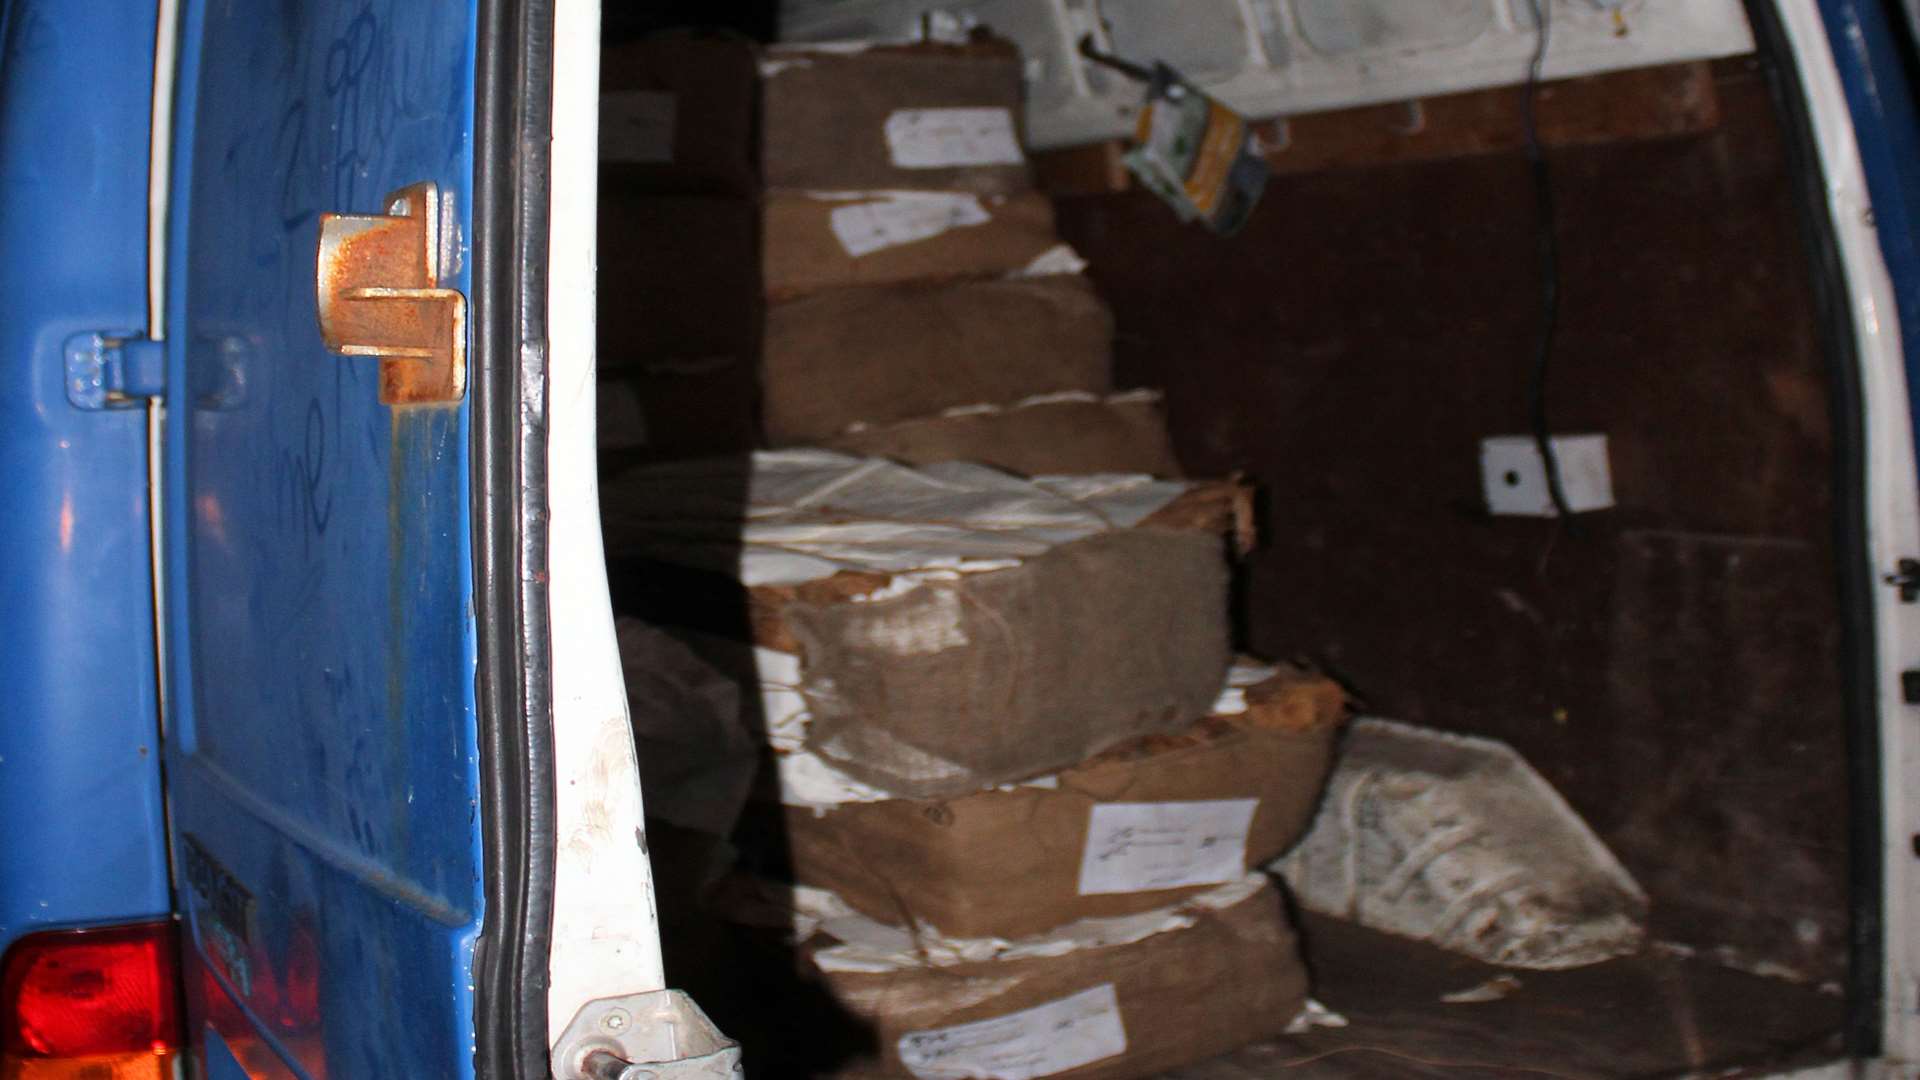 The van load of raw tobacco seized by customs and excise officers